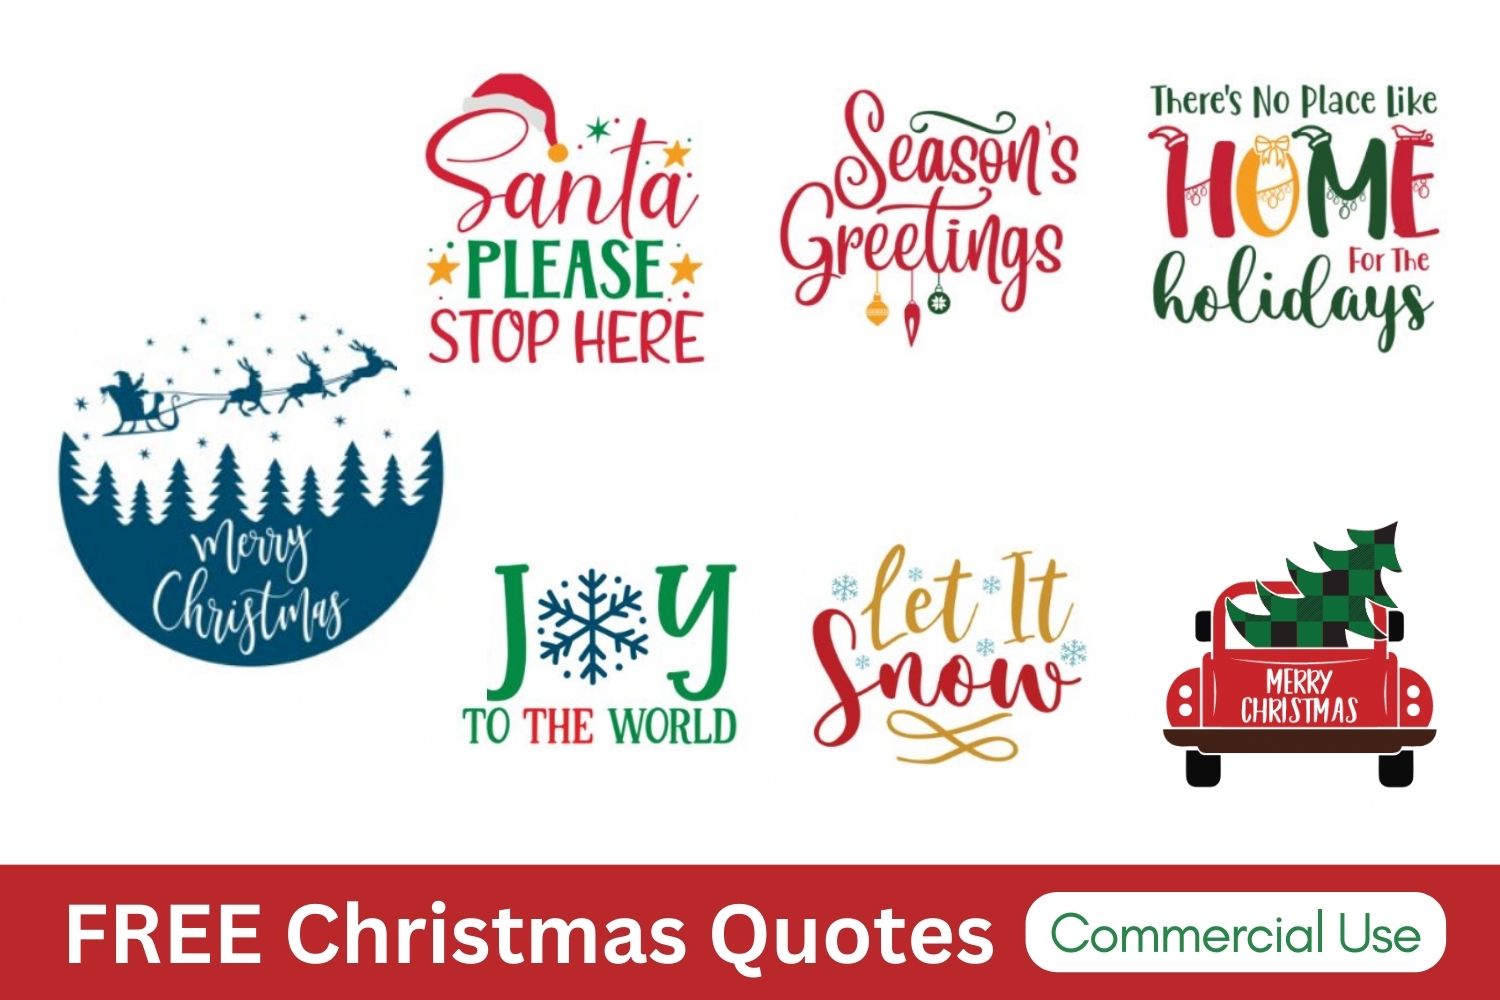 Christmas Sayings and Quotes SVG cricut silhouette laser cut download free layered Christmas quotes, Christmas sayings, cricut designs, svg files, silhouette, winter, holidays, crafts, embroidery, bundle, cut files, vector, download, card stock, glowforge, Clip Art, Funny Christmas.